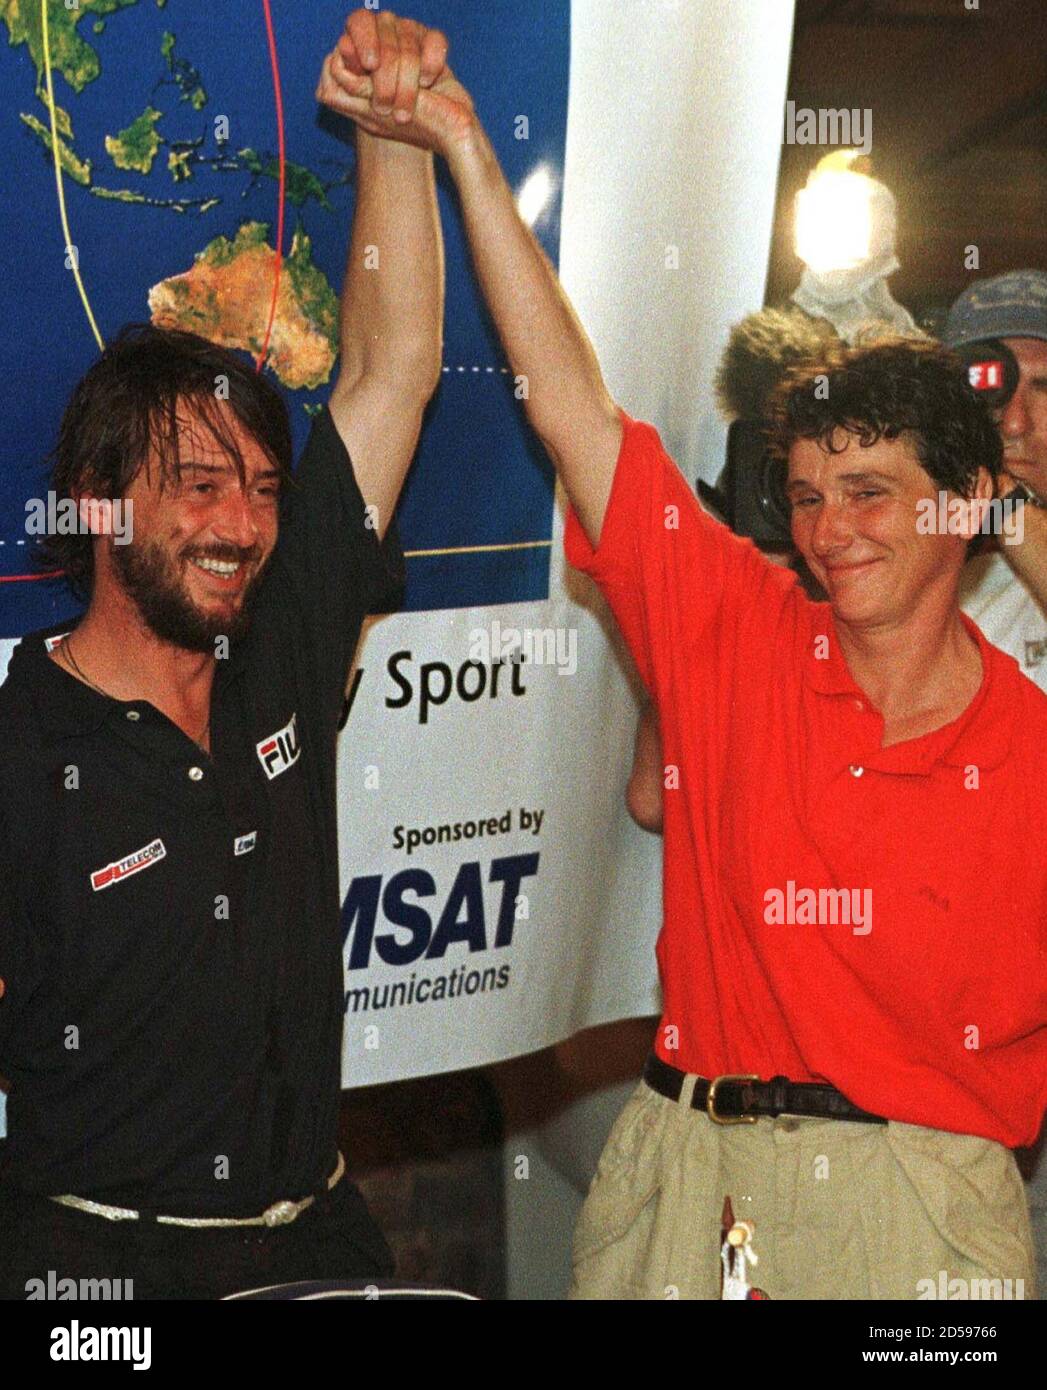 Italian skipper Giovanni Soldini (L) and his French colleague Isabelle  Autissier raise their hands at the begining of a news conference after  their arrival at Punta del Este on the boat Fila,